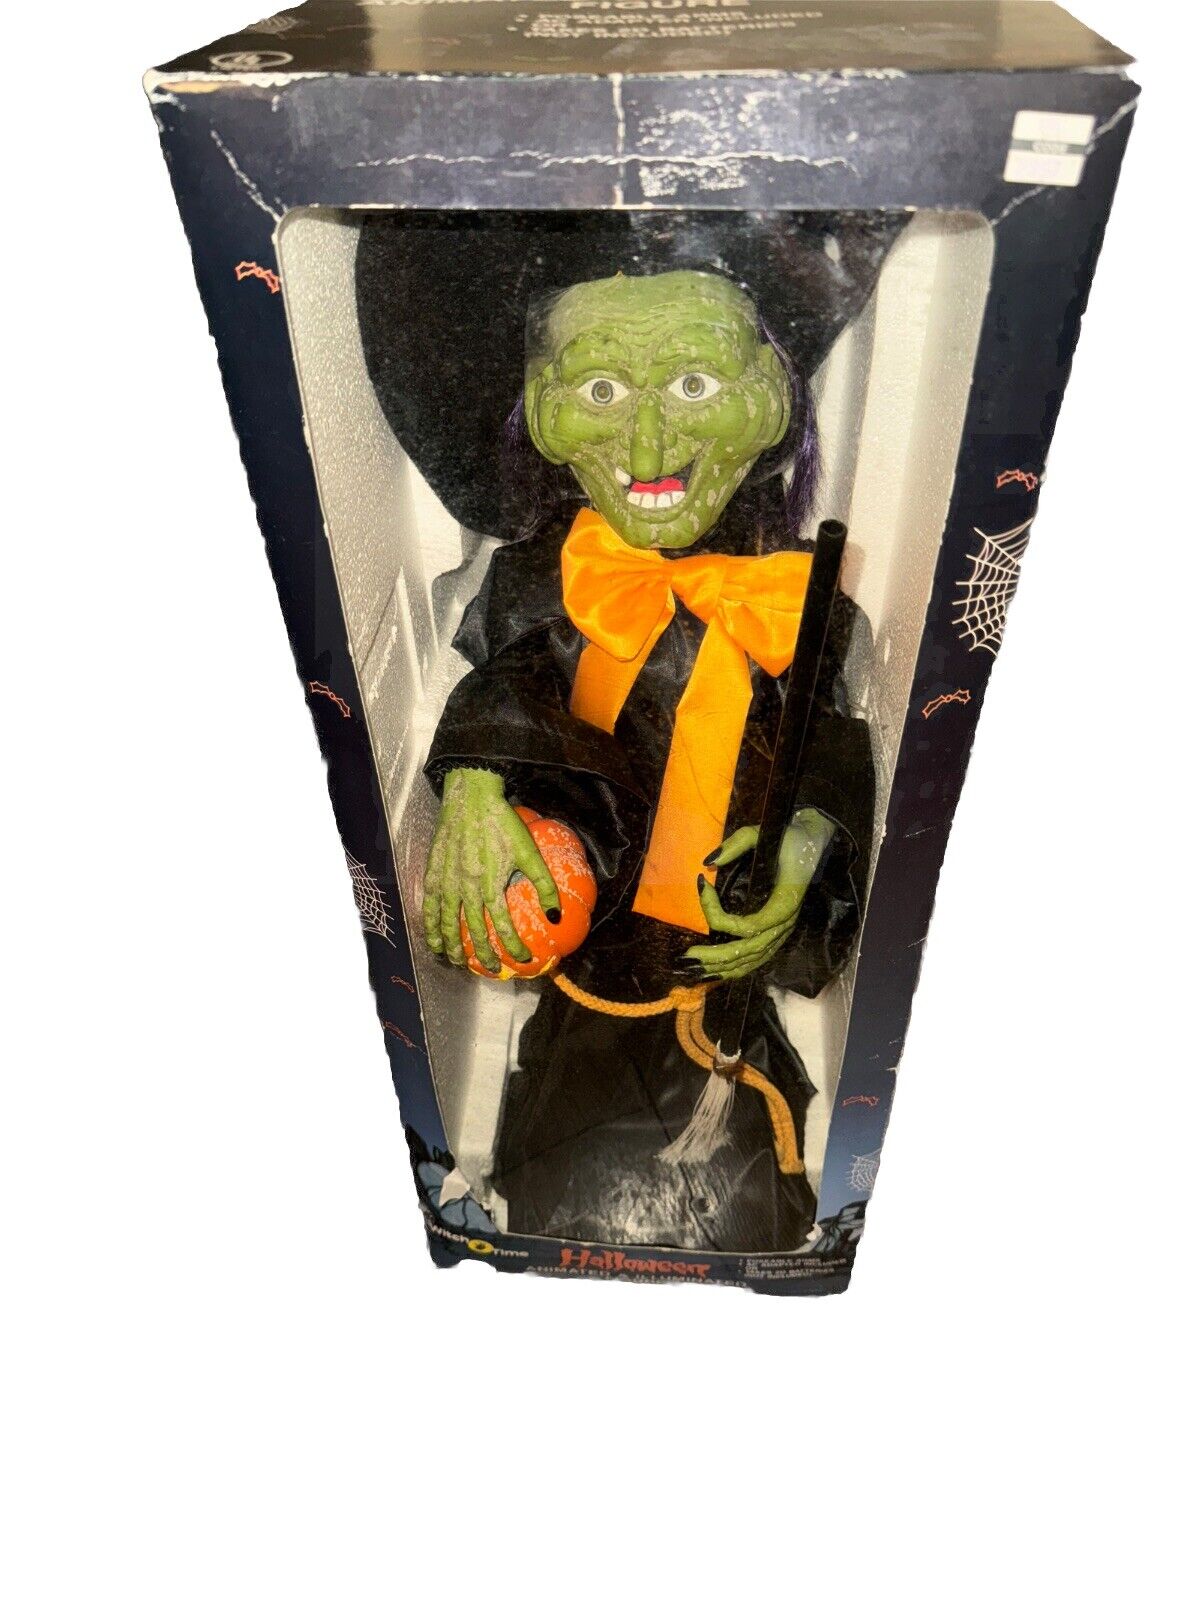 Witch Time “Witch” Halloween Animated Illuminated Figure 24” Complete Works